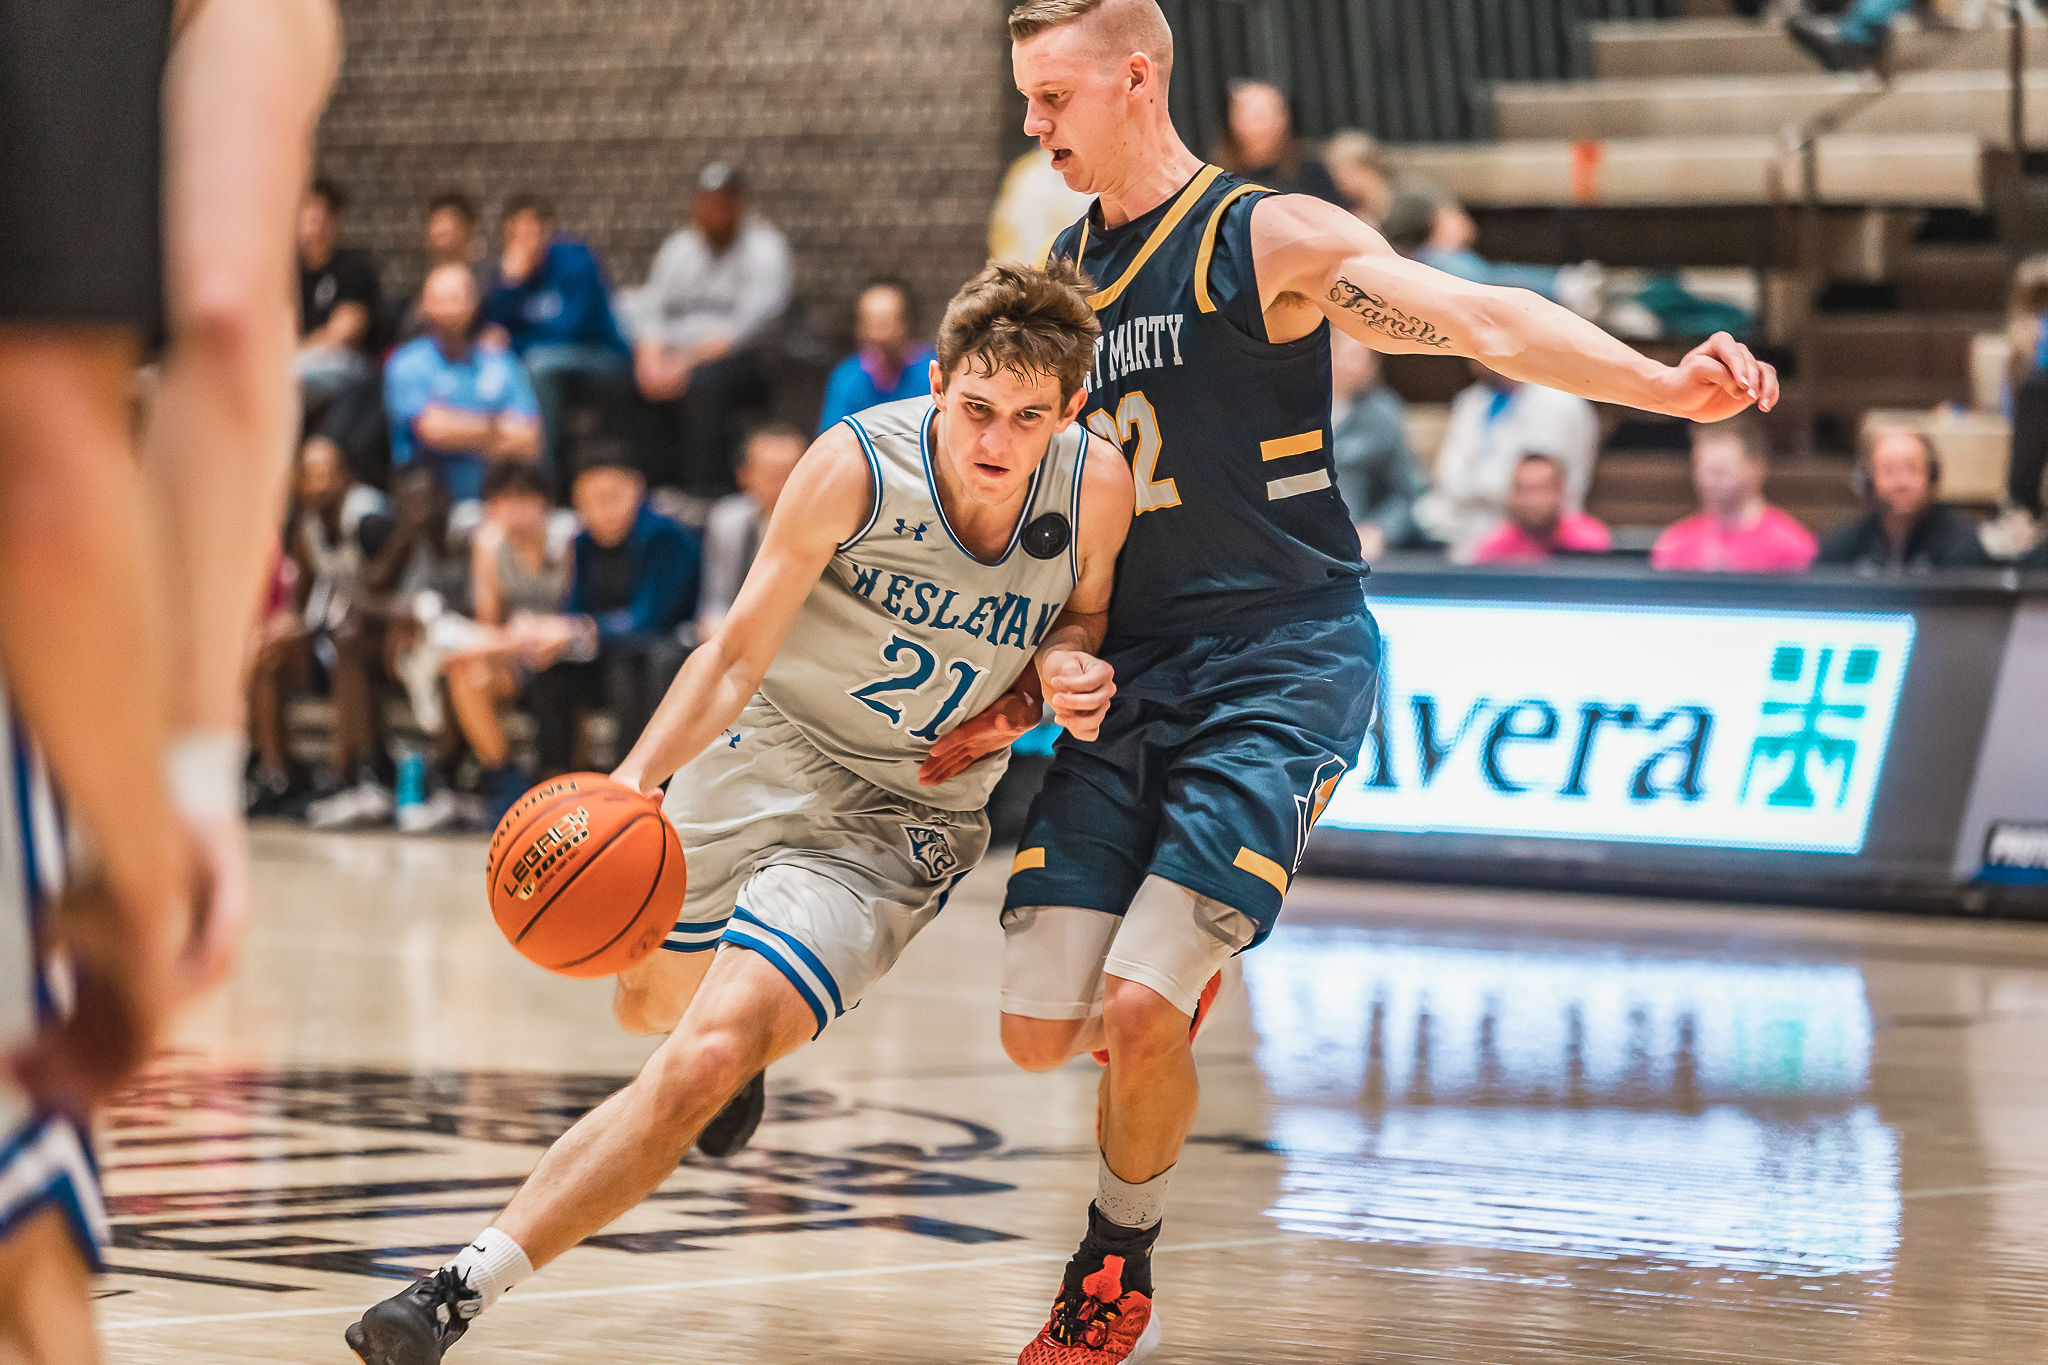 TIGERS LATE RUN HELPS SECURE WIN OVER THE SPIRES, 71-67